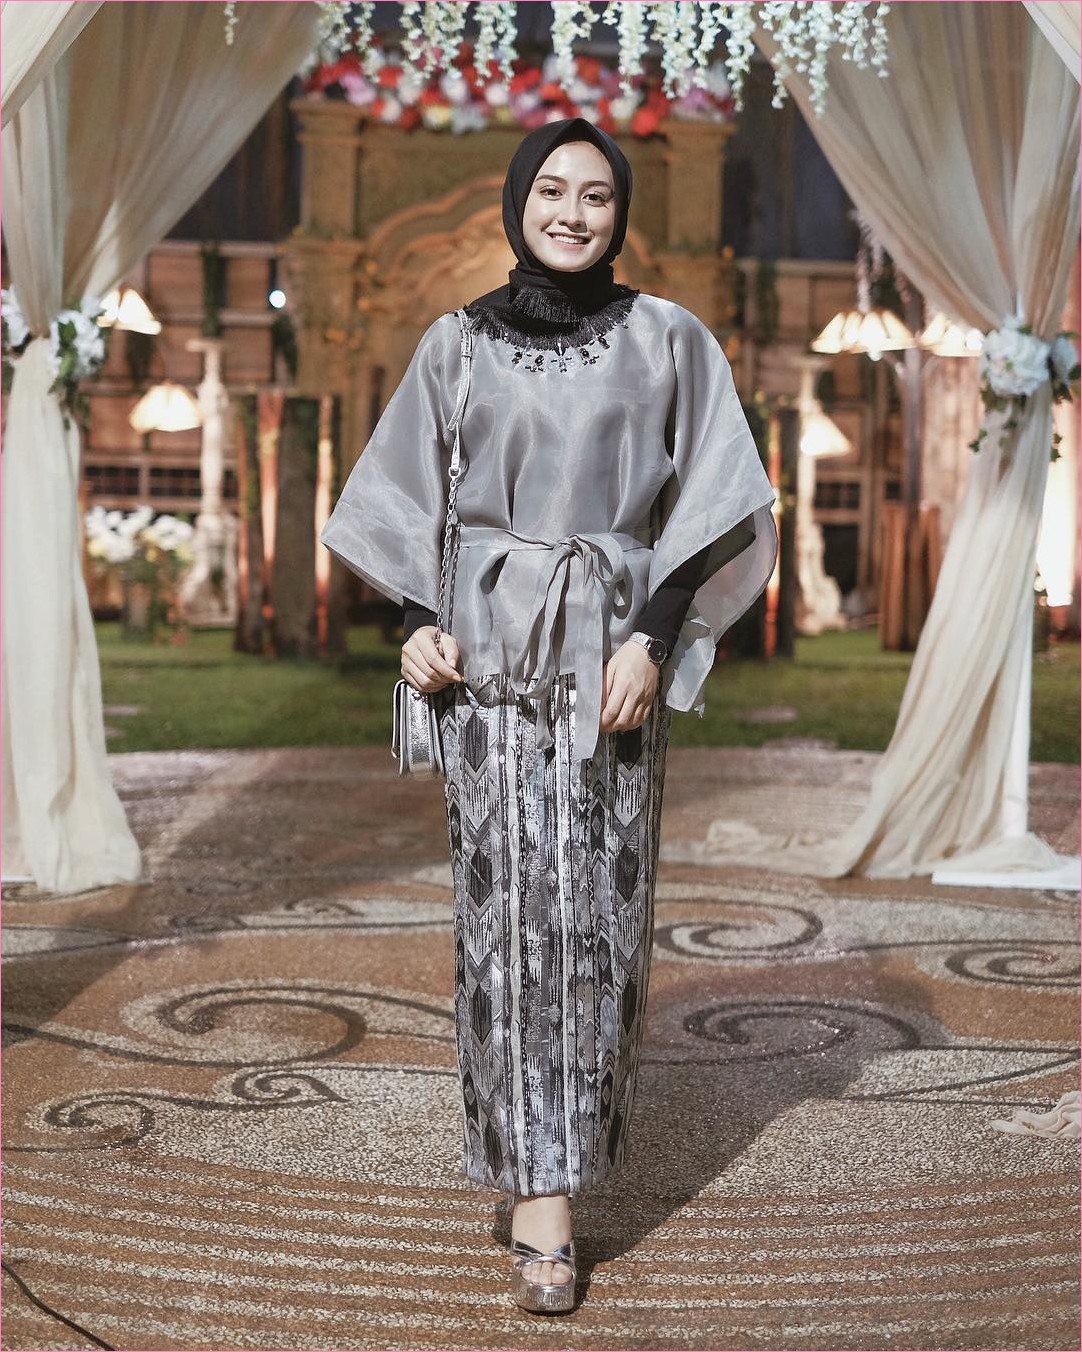 OOTD kondangan Hijab outfit in 2019 Ootd Hijab outfit t